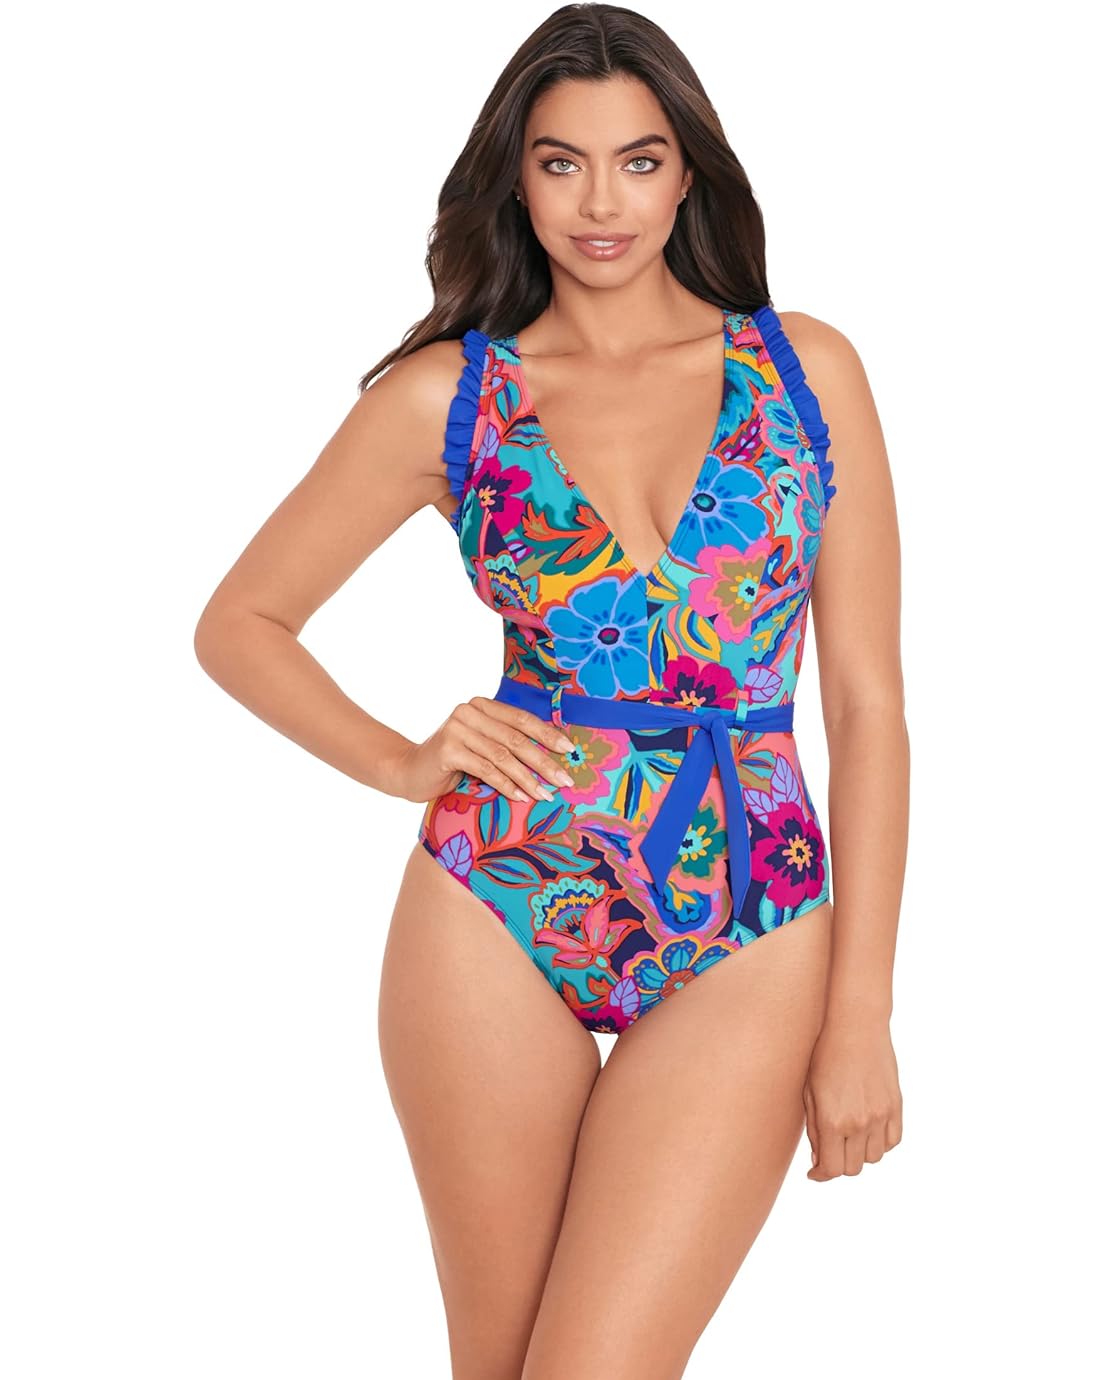 Skinny Dippers Tapestry Cinch Suit